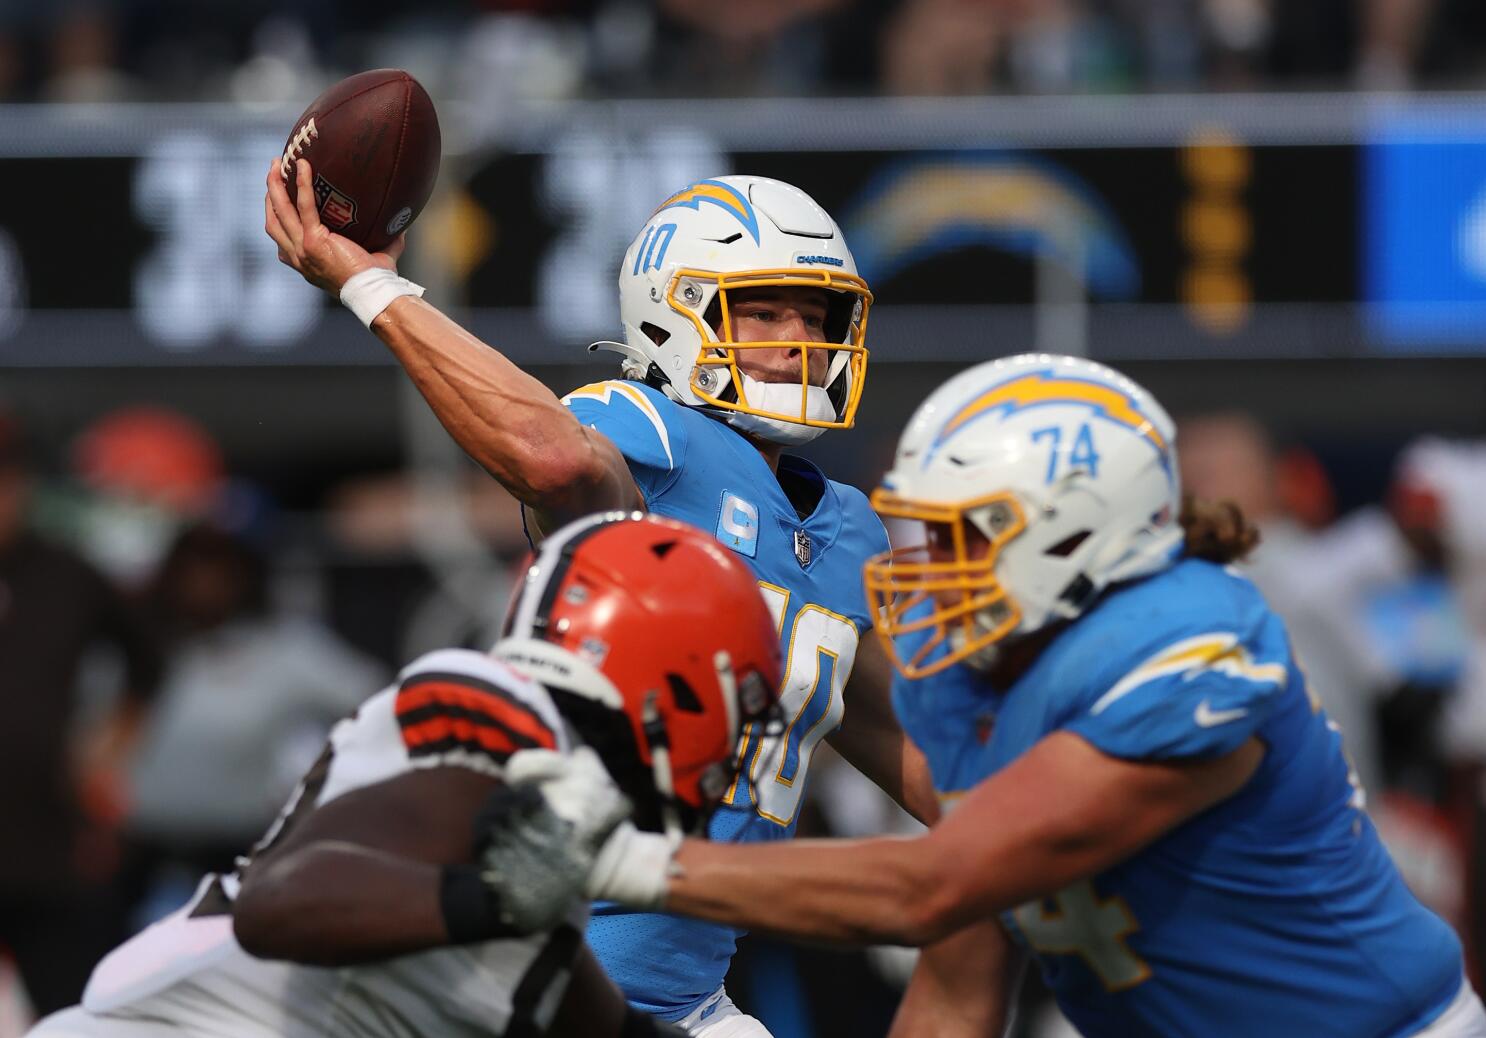 Justin Herbert and Chargers fall flat late in loss to Dolphins